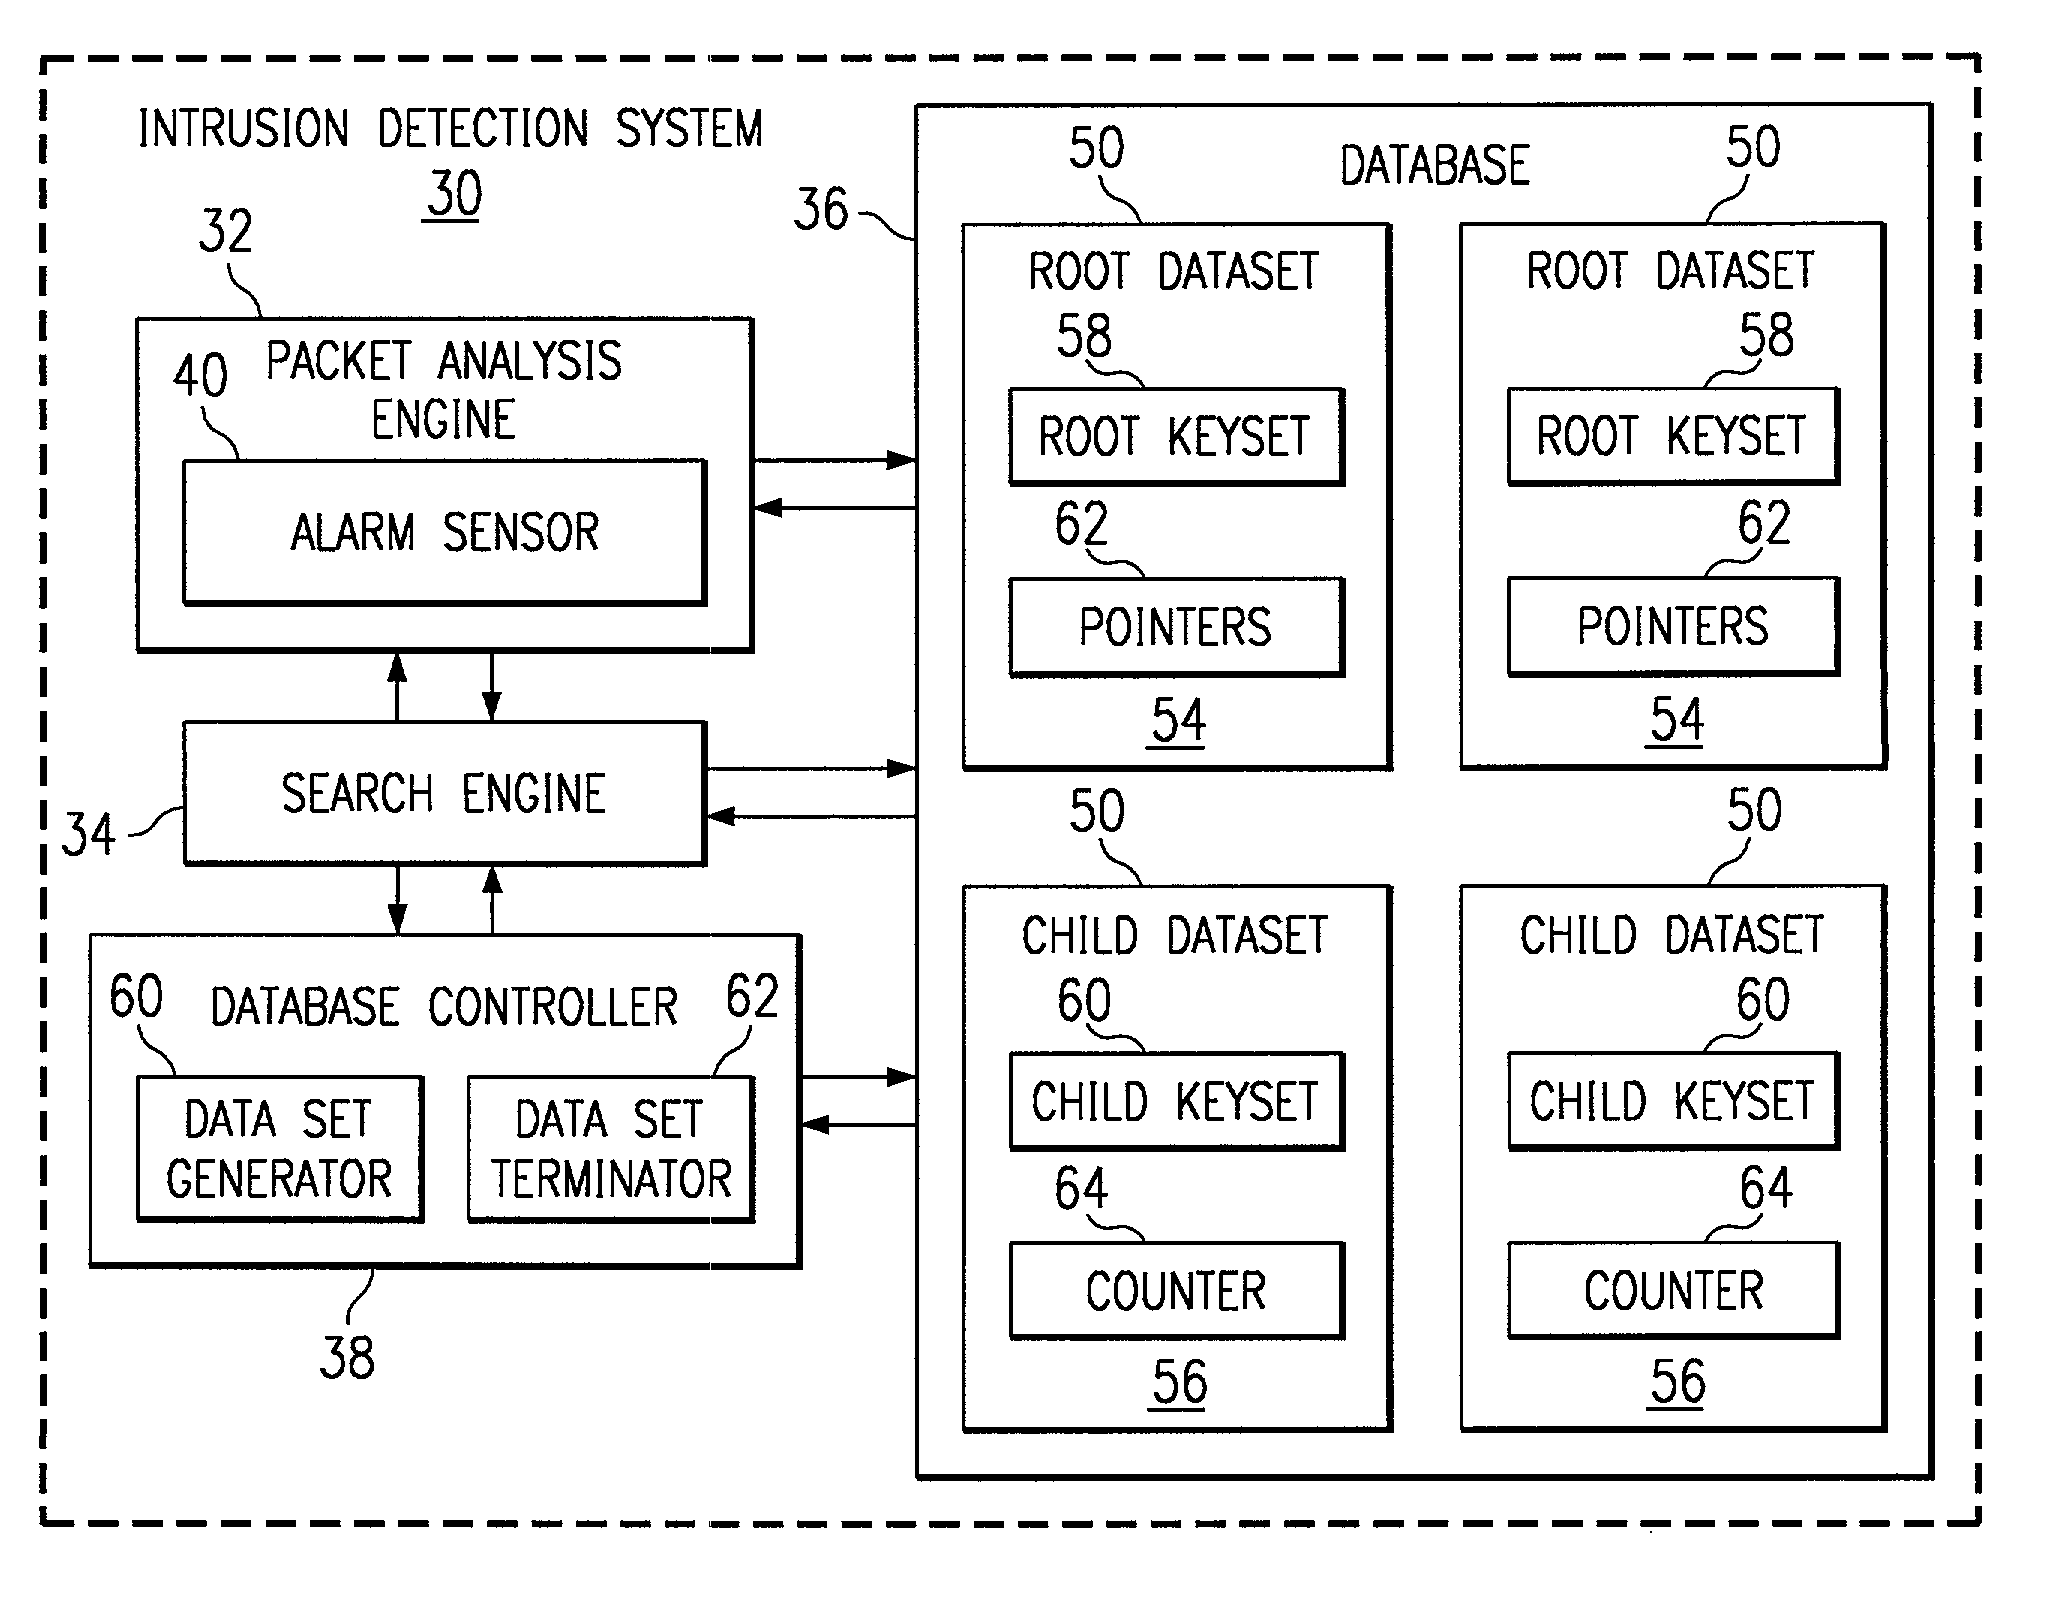 Method and system for maintaining network activity data for intrusion detection